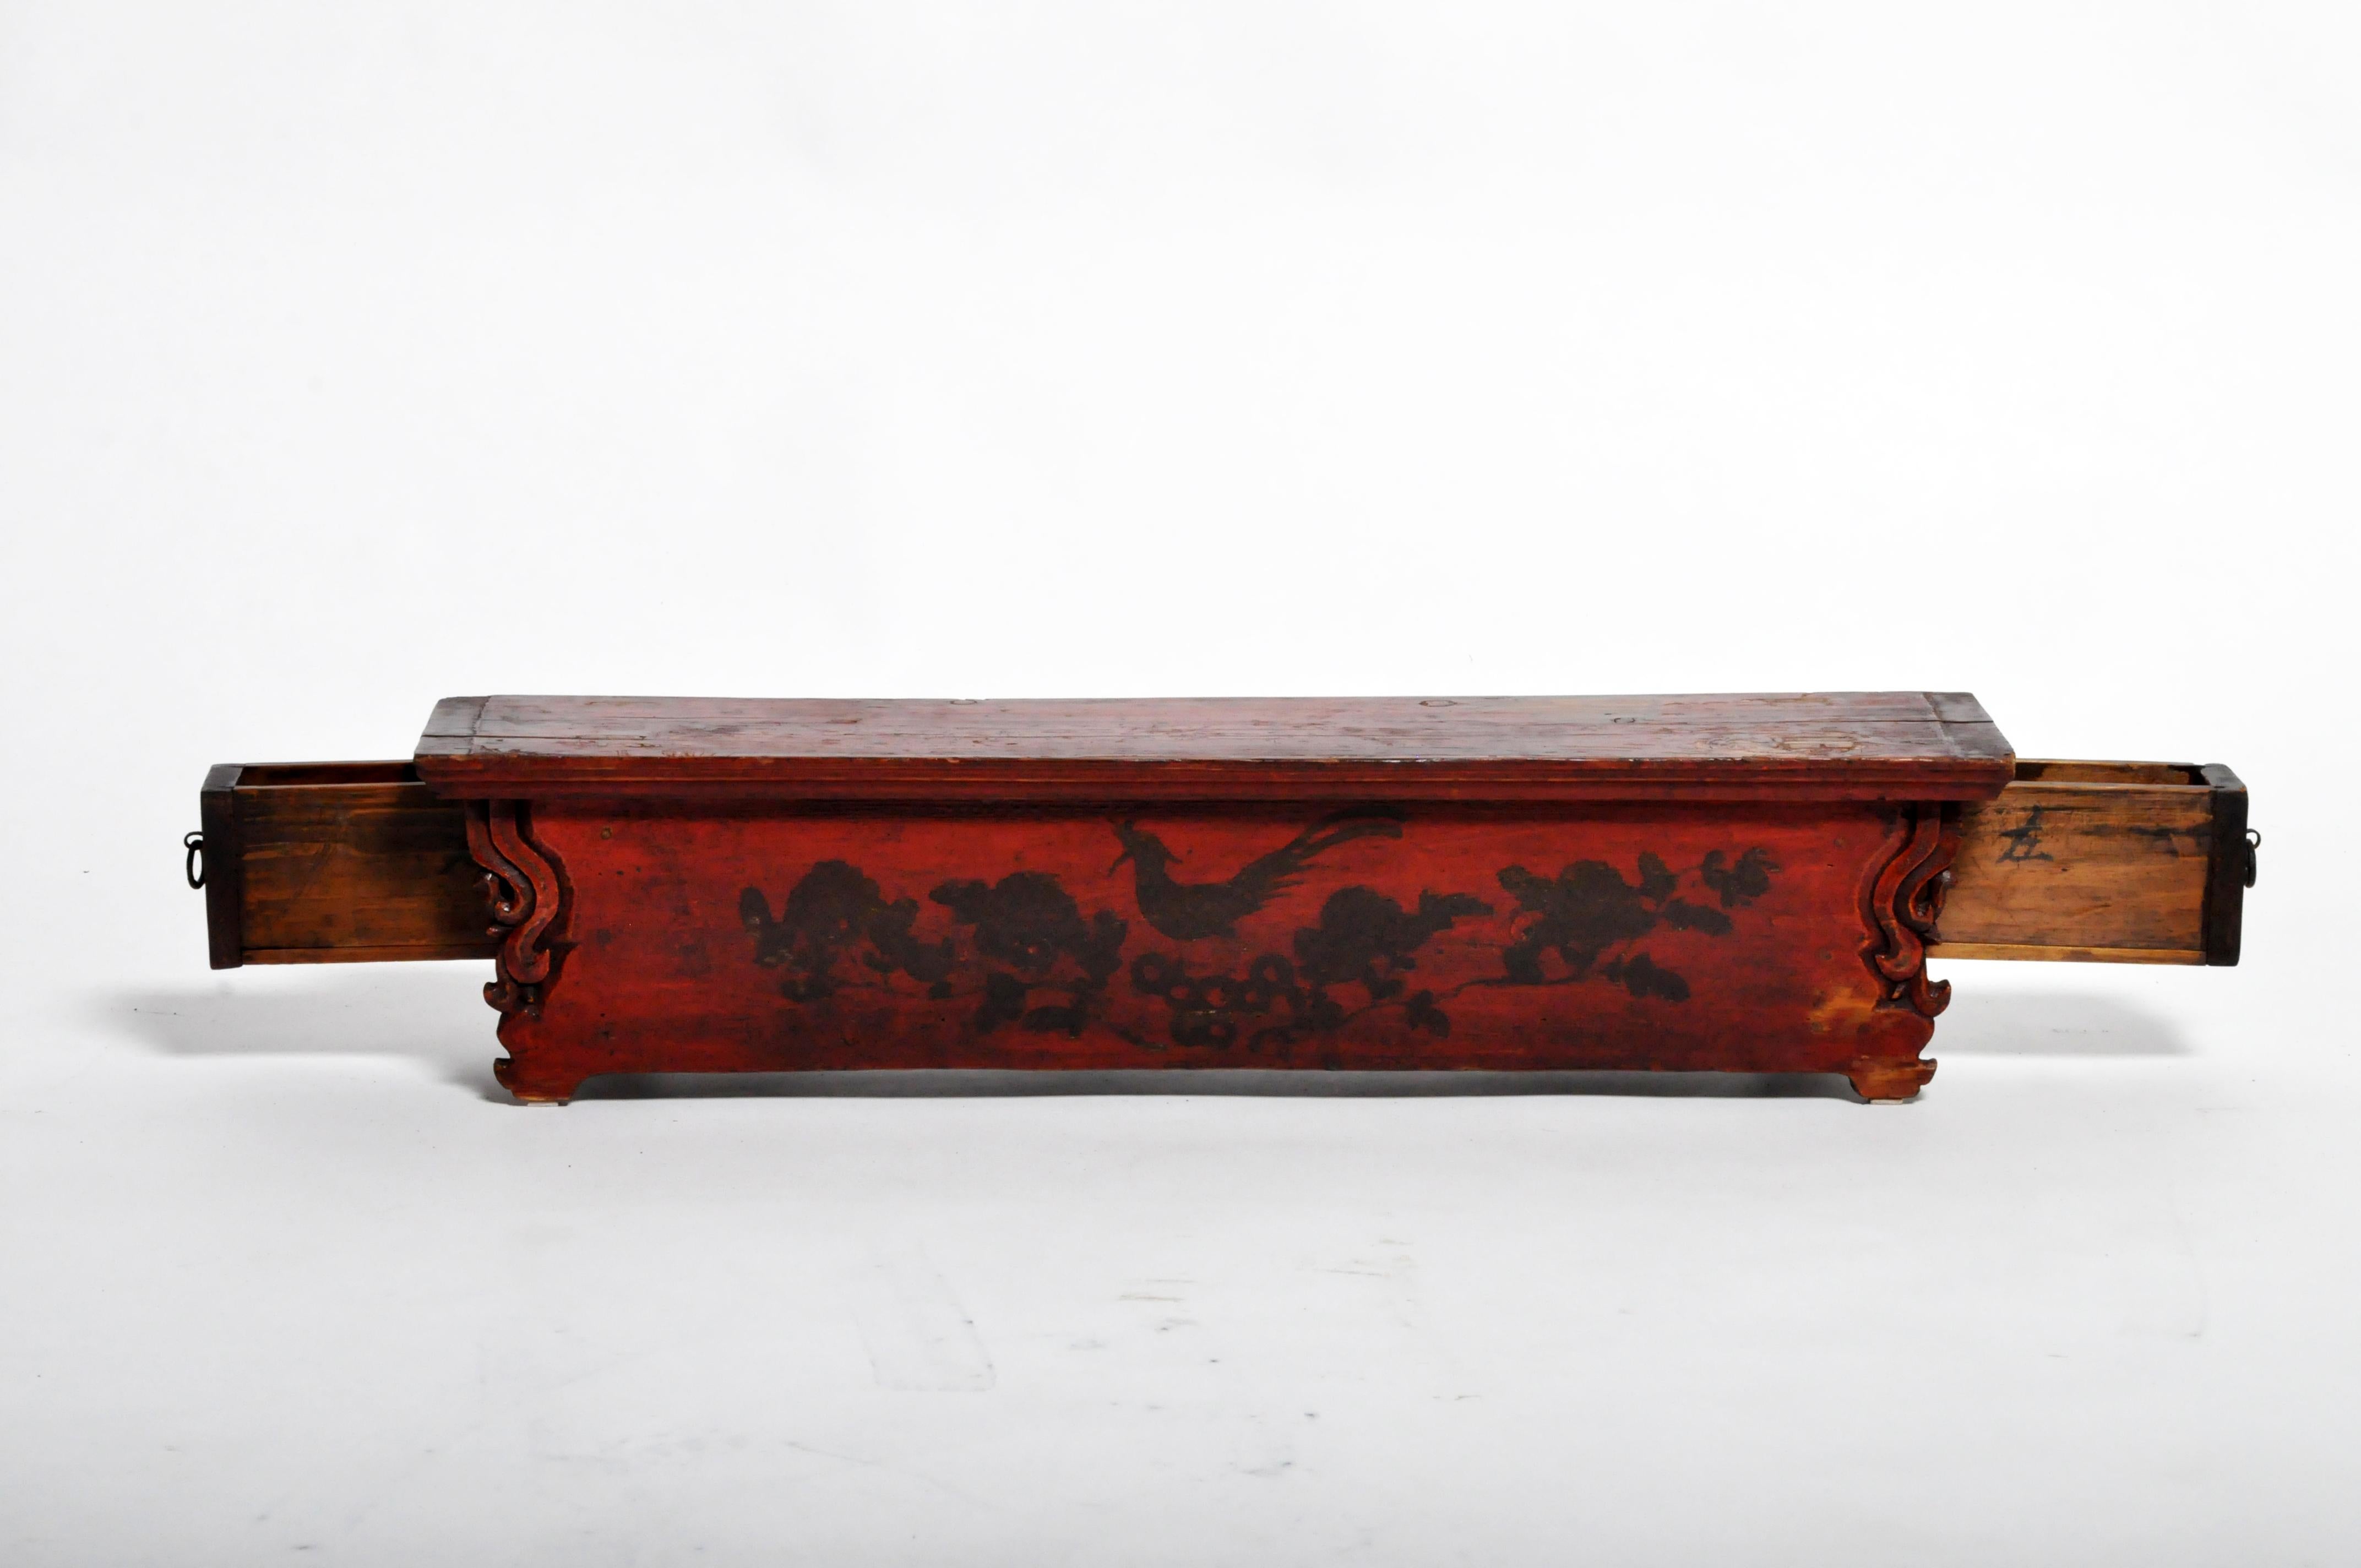 This small Fir Wood stand held sculptures, vases, and ritual objects. It was finished in oxblood-colored lacquer and decorated with a small painting depicting birds and flowers. Each end conceals a drawer for incense sticks. The piece dates to the